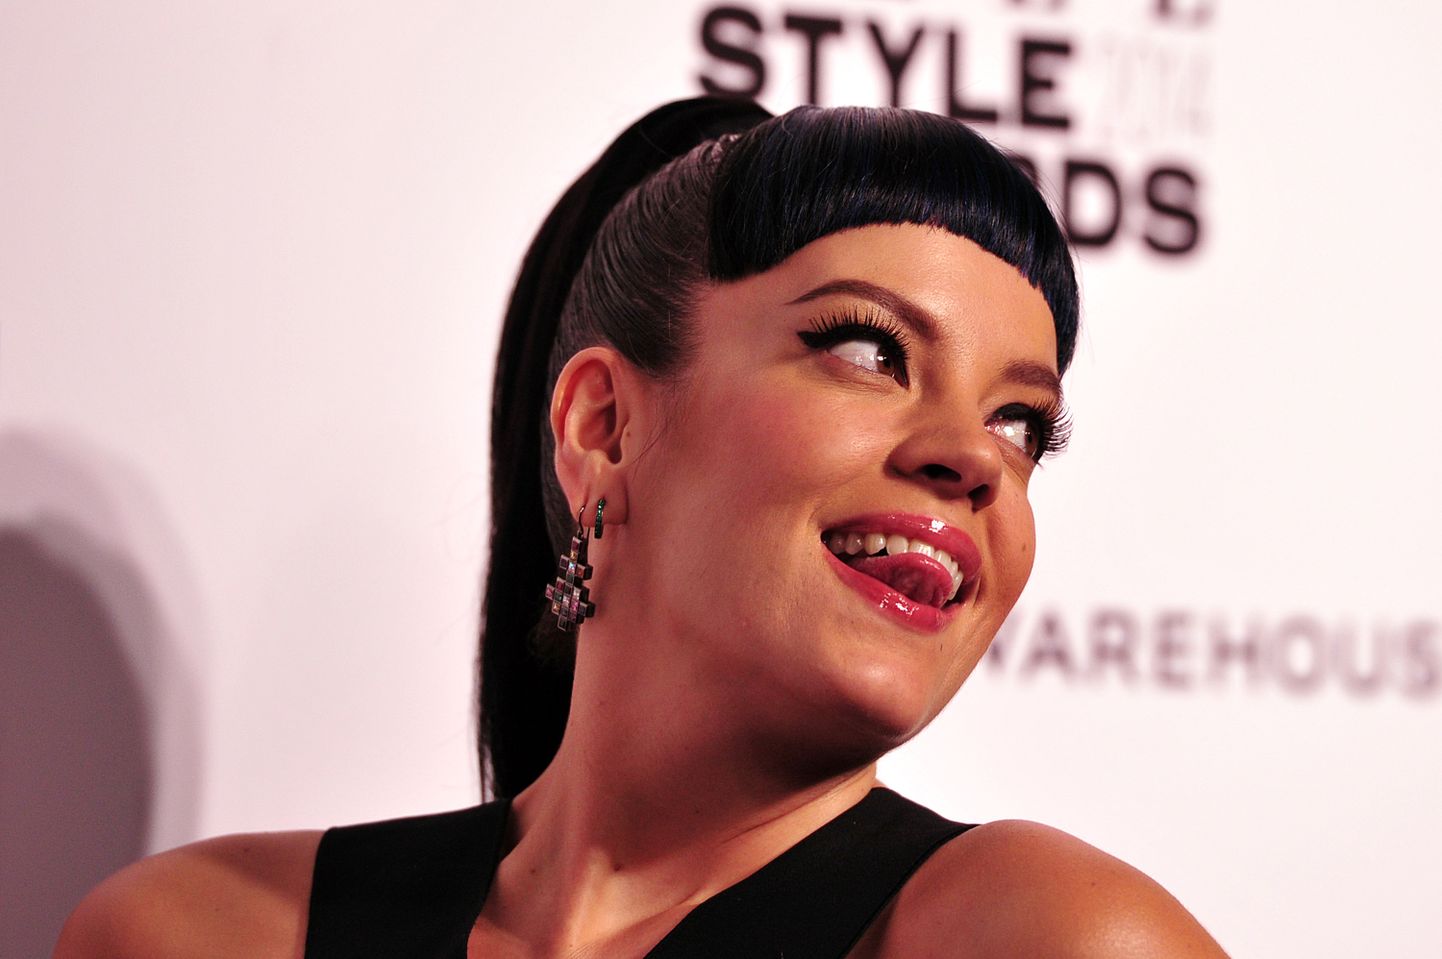 British singer Lily Allen attends the Elle Style Awards in central London, on February 18, 2014. AFP PHOTO/CARL COURT